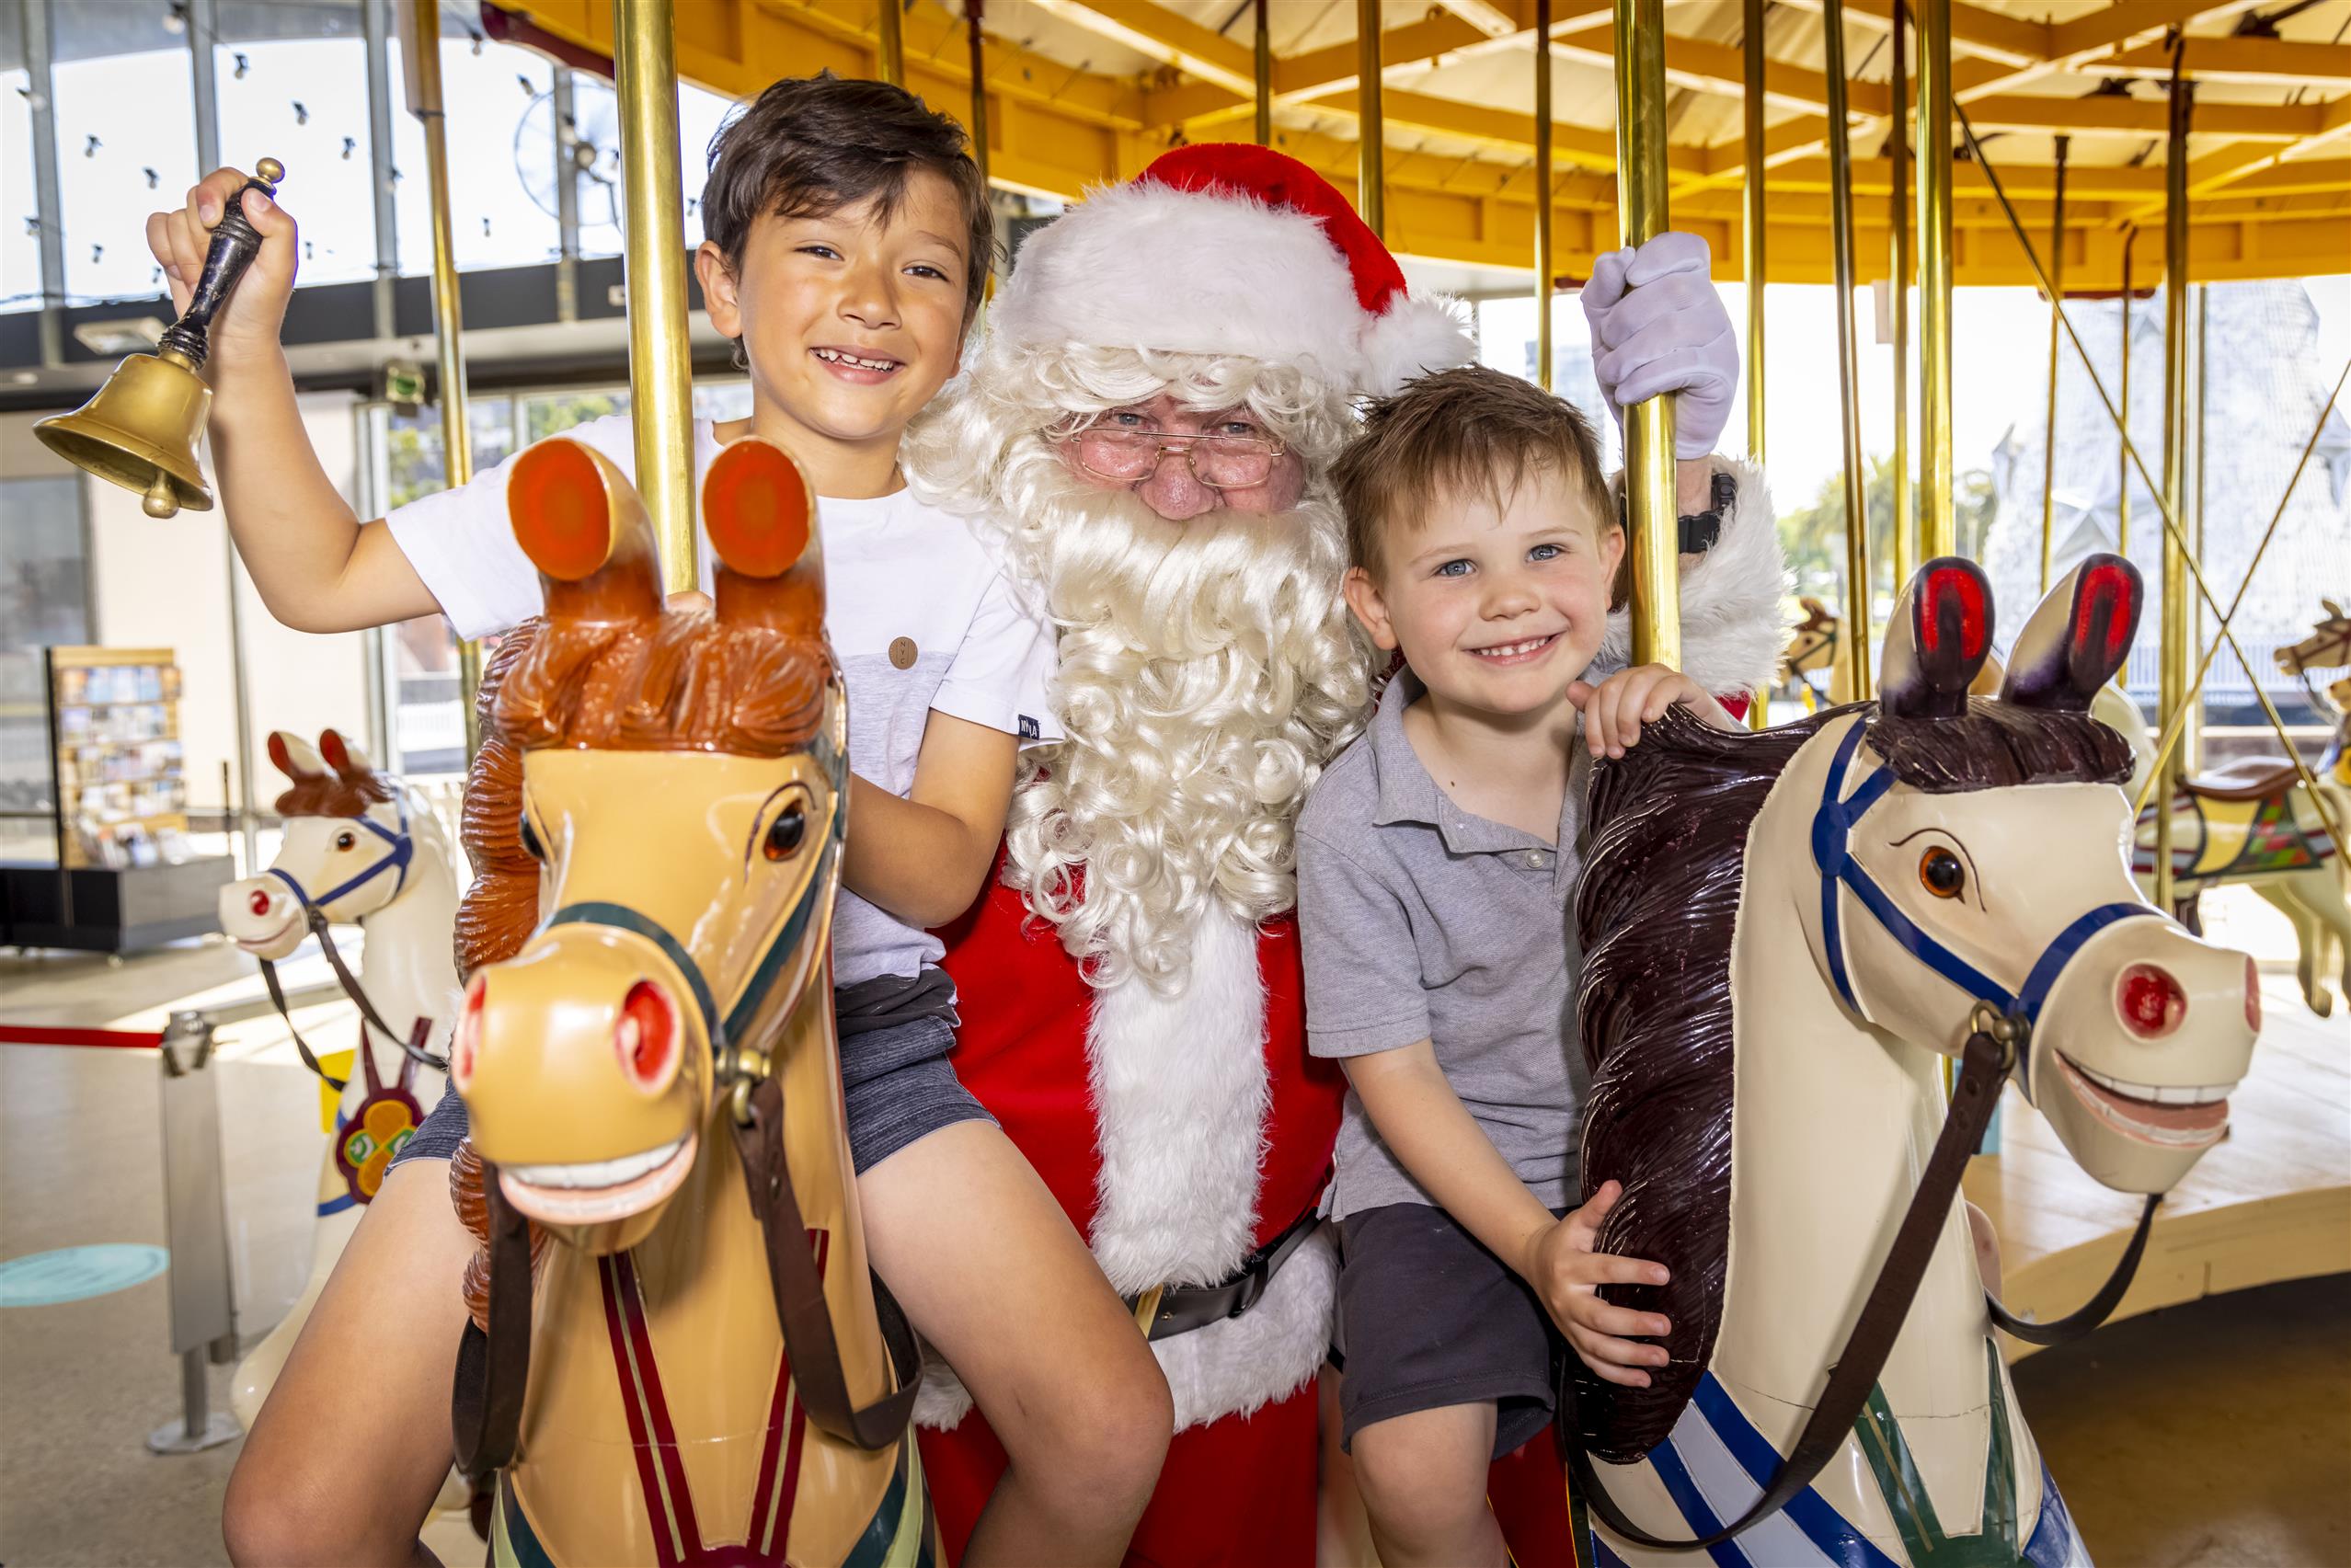 Santa poses on the Carousel horses with two children.